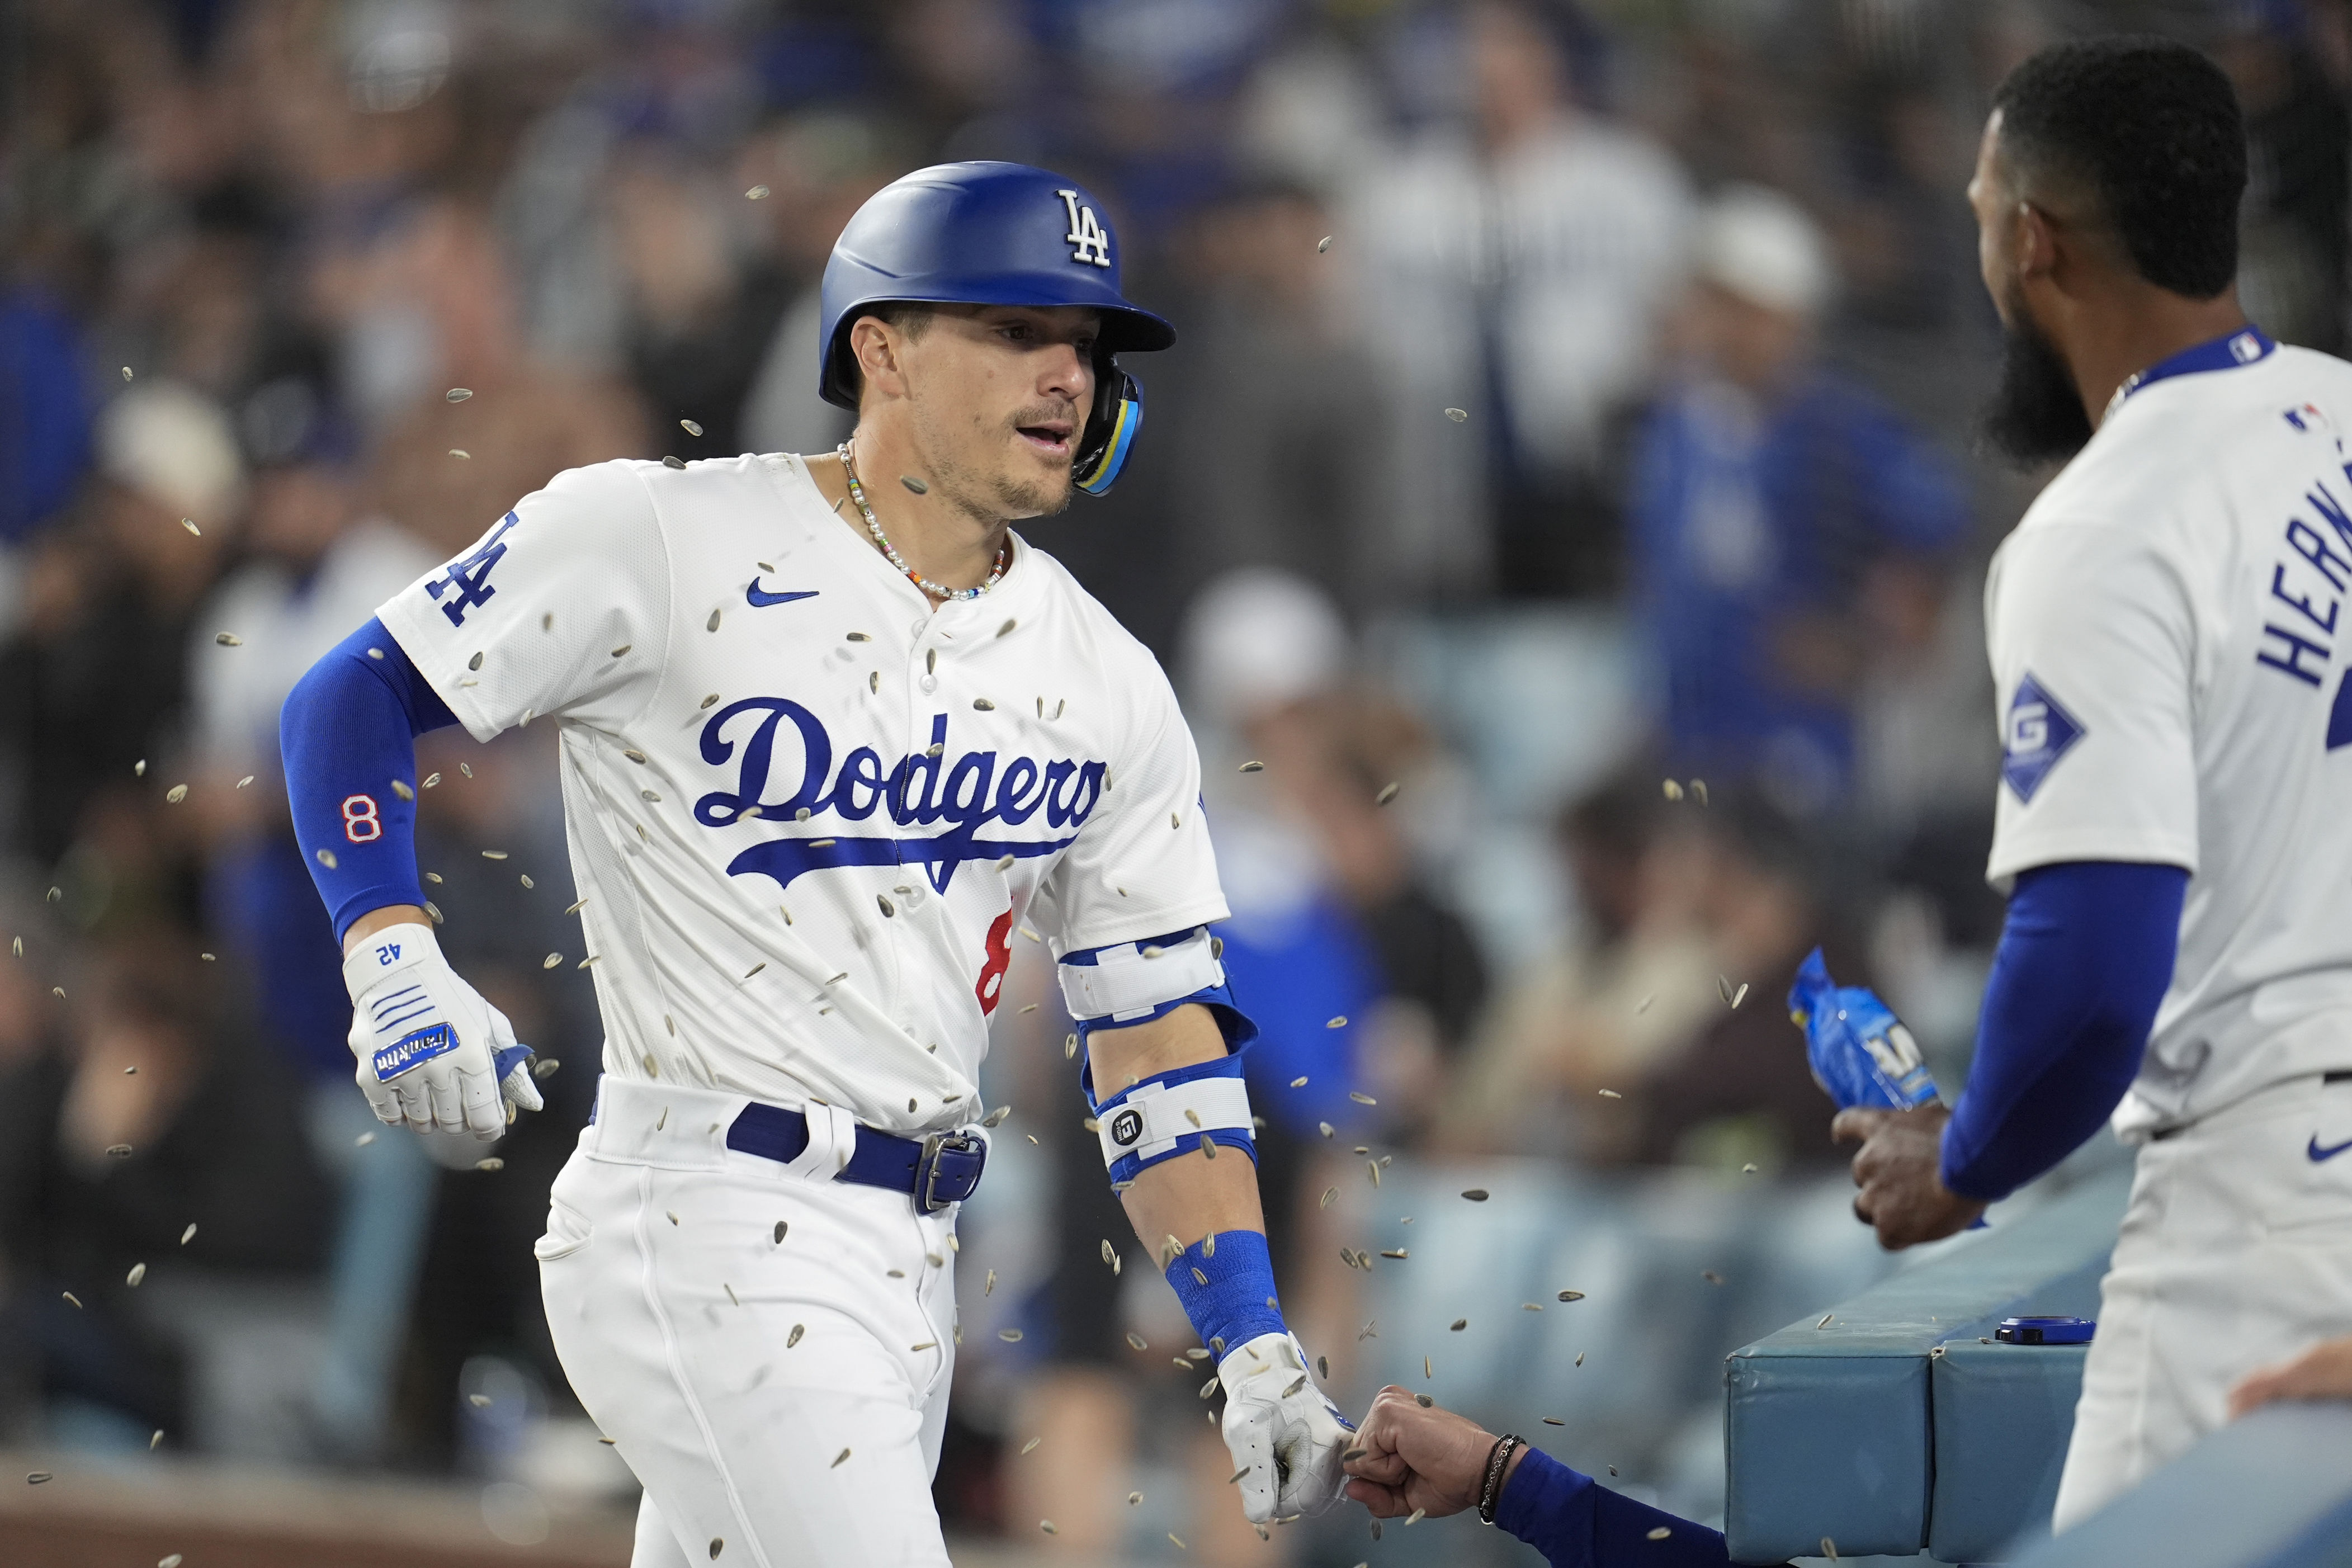 mookie betts ties career high with 5 hits as dodgers beat nationals 6-2